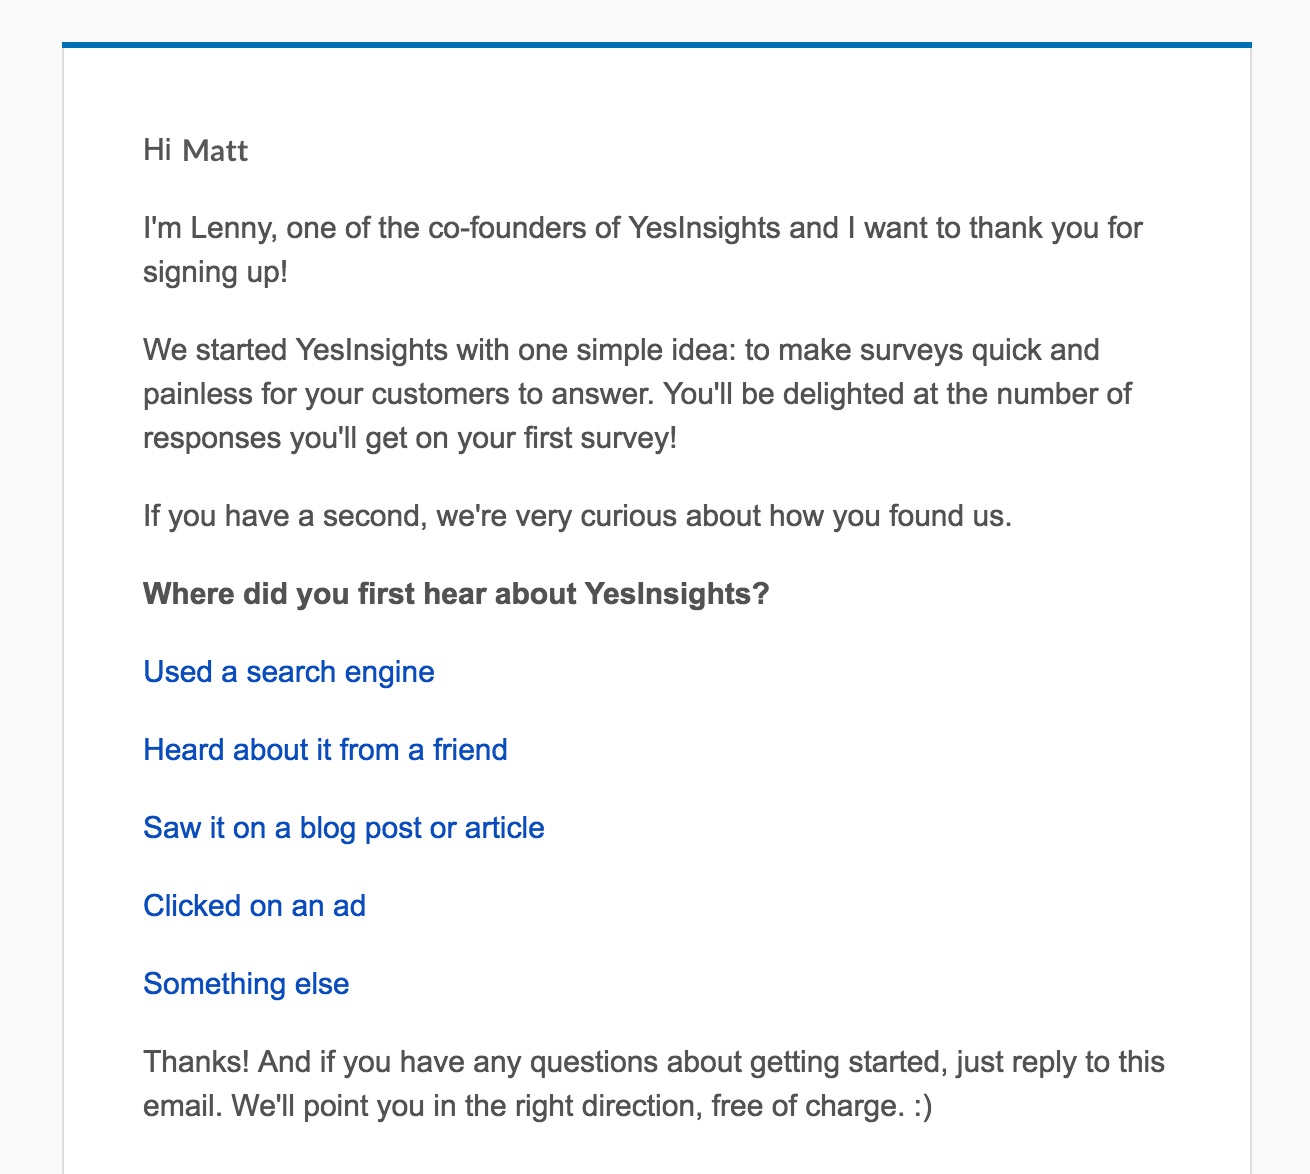 image of an old YesInsights welcome email which was one of the best customer surveys because it embedded a survey asking about where the new prospect heard about YesInsights